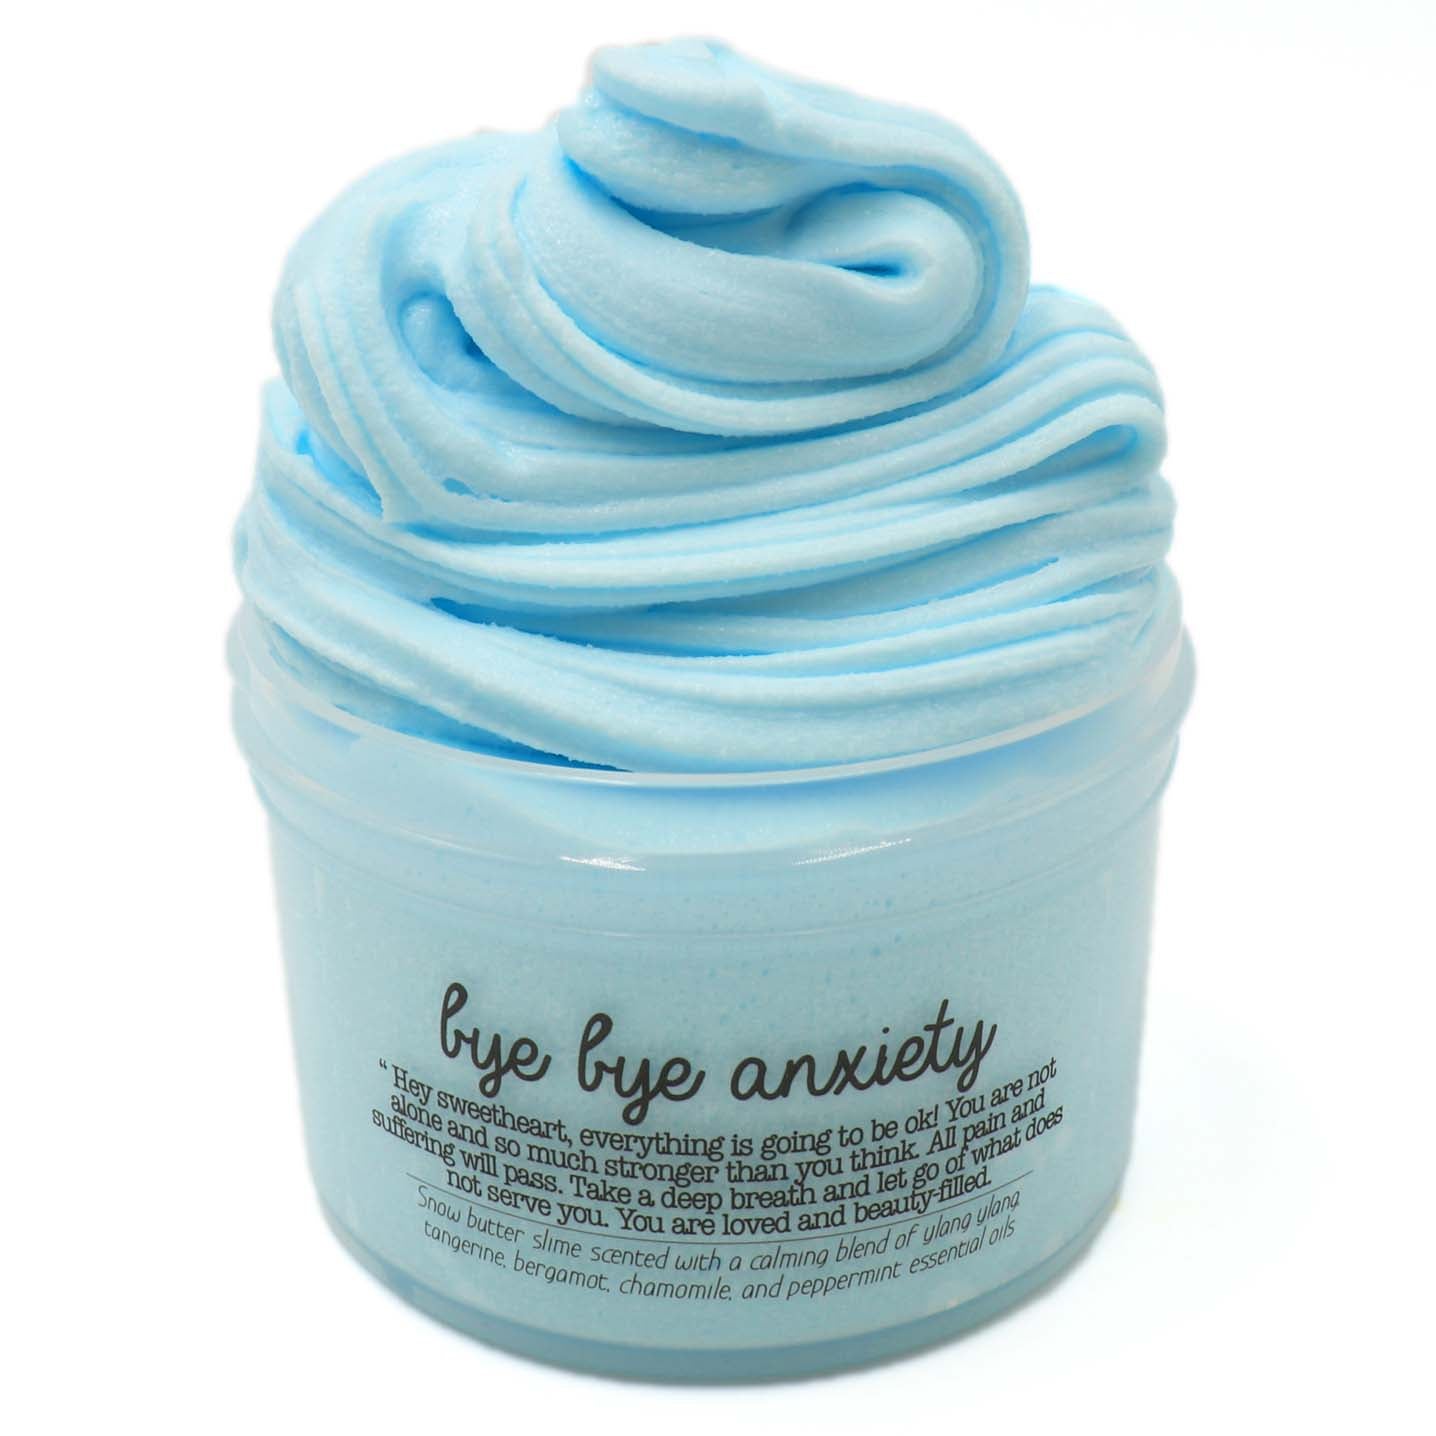 Bye Bye Anxiety Blue Relief Toy Tool Stress Sensory Therapy Dough Aromatherapy Essential Oil Scented Slime Fantasies Shop 7oz Front View